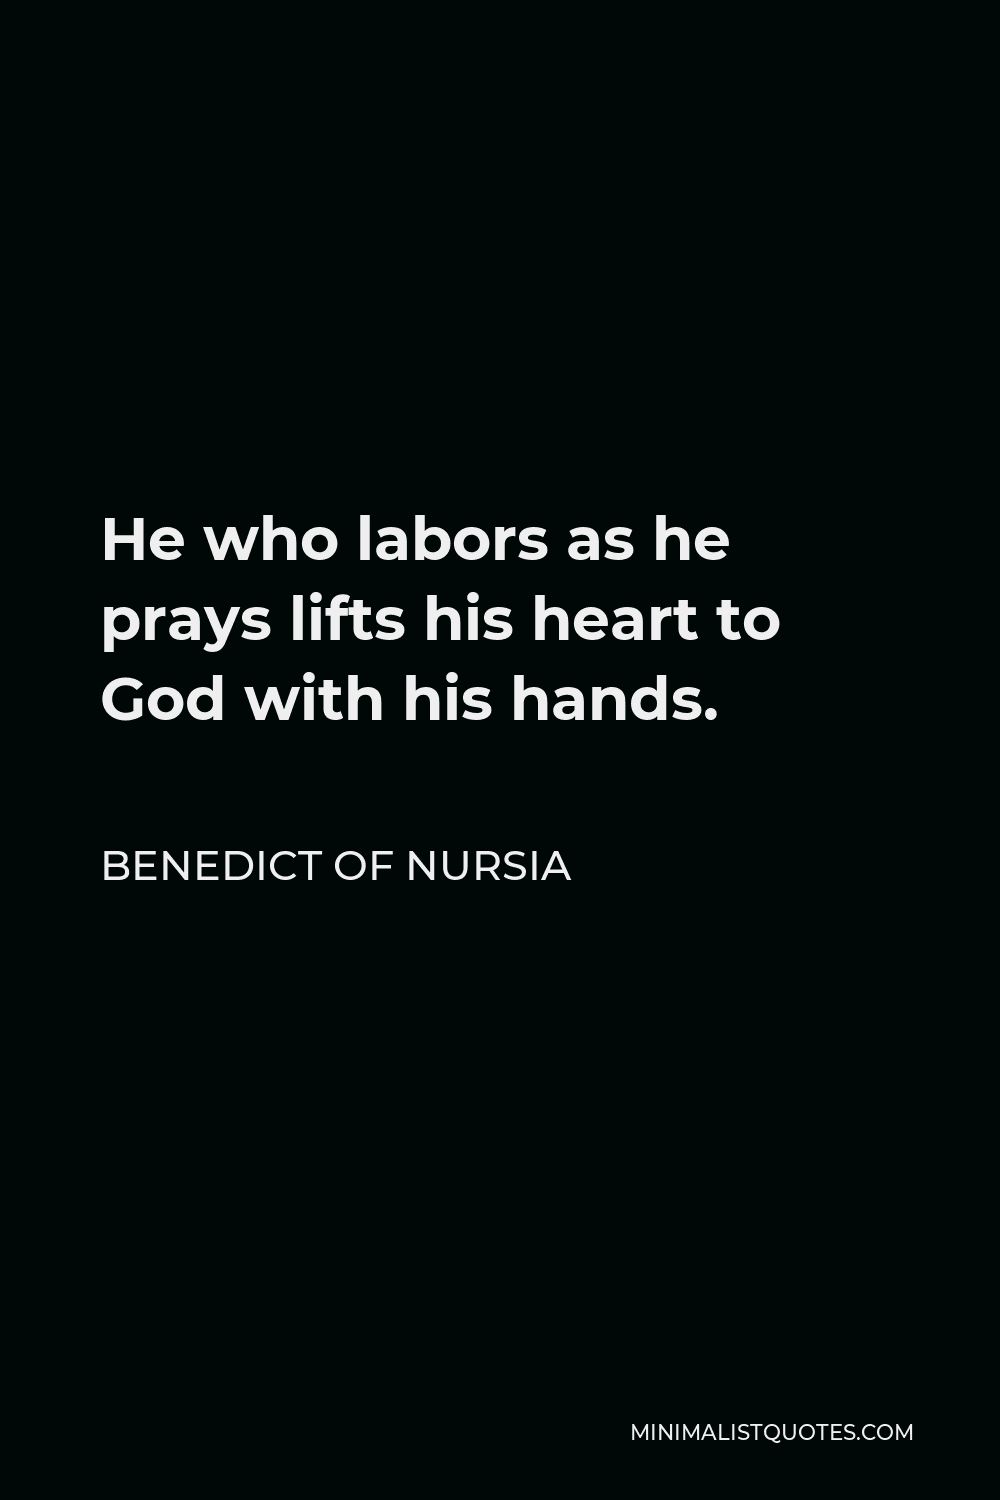 Benedict of Nursia Quote - He who labors as he prays lifts his heart to God with his hands.